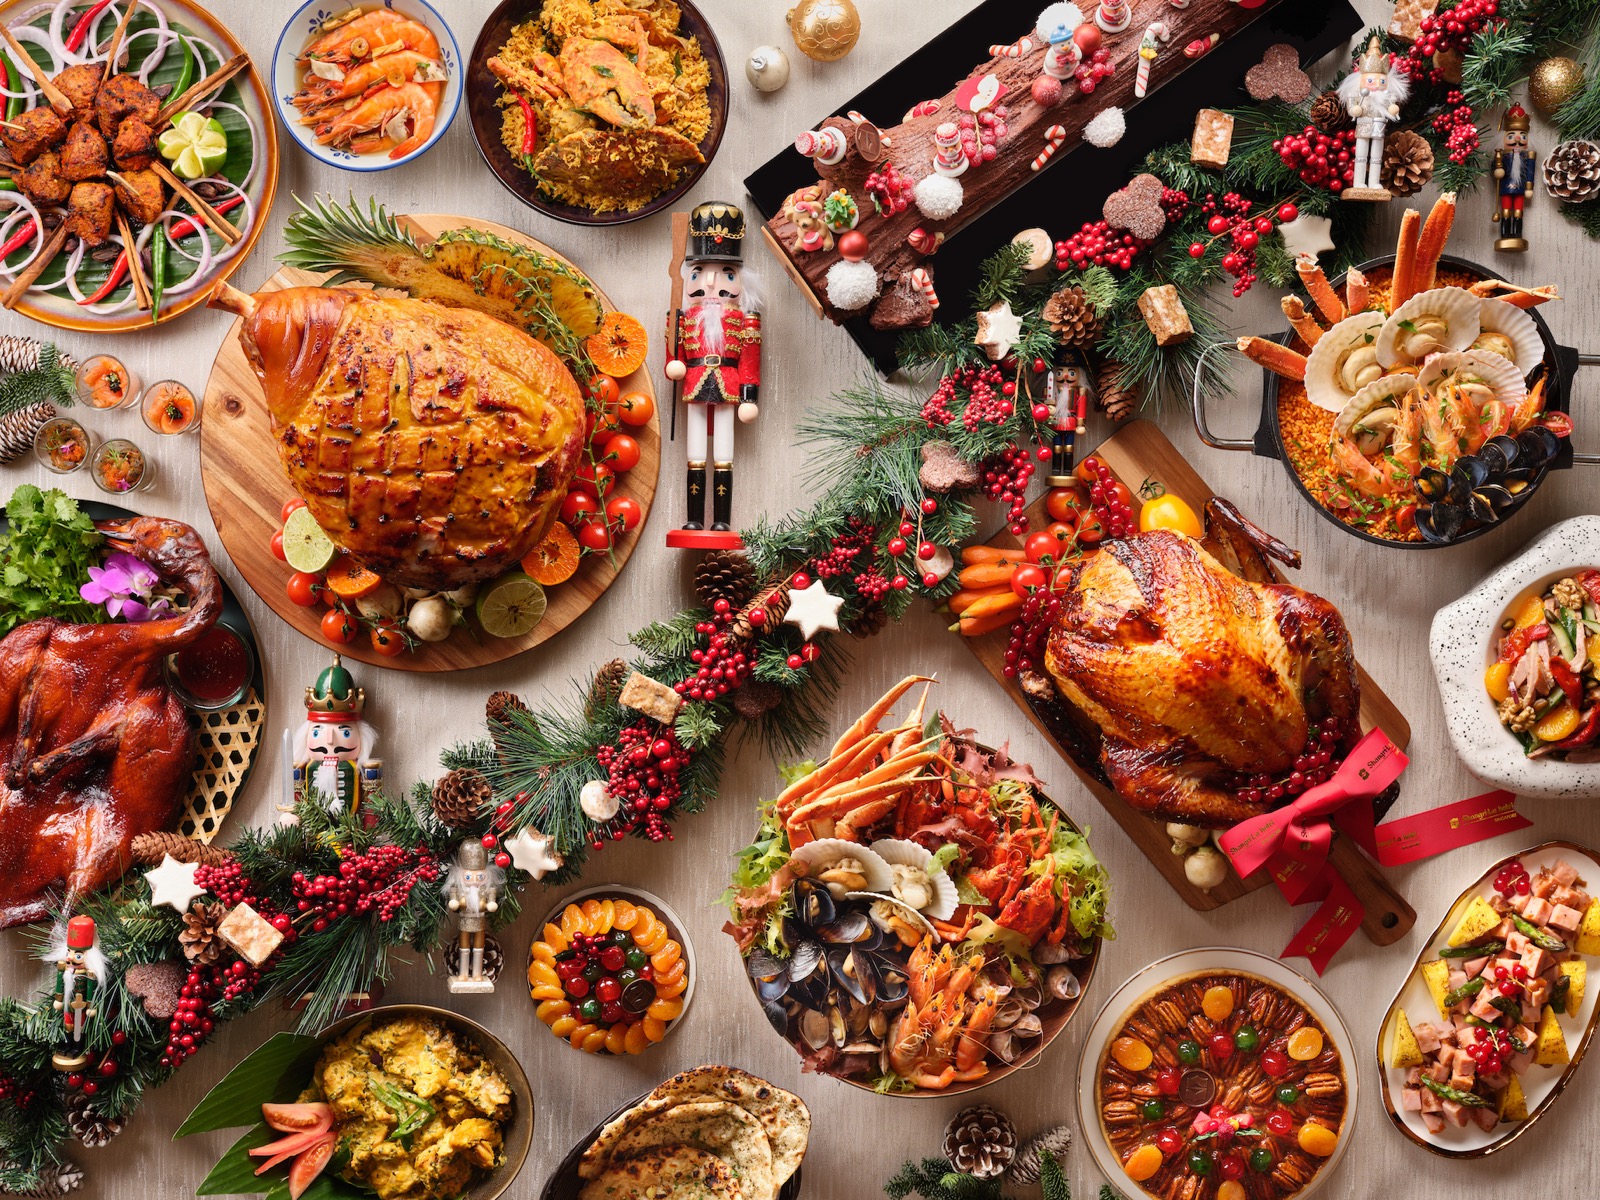 It’s Time to Find Out What Your 🥳 Holiday Vibe Is With the 🎄 Christmas Feast You Plan Christmas feast dinner